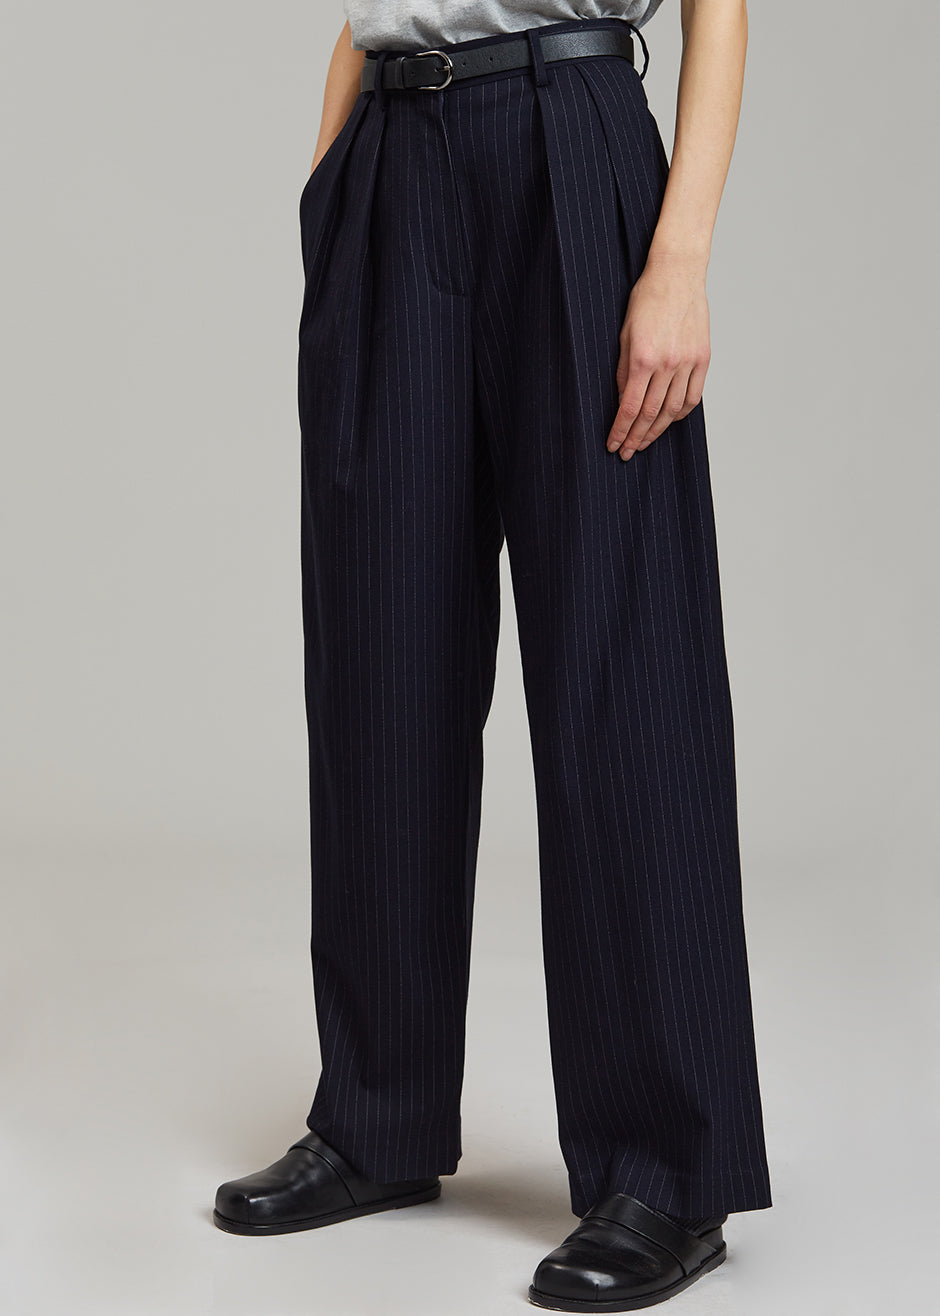 Tansy Pleated Trousers - Navy Pinstripe - 2